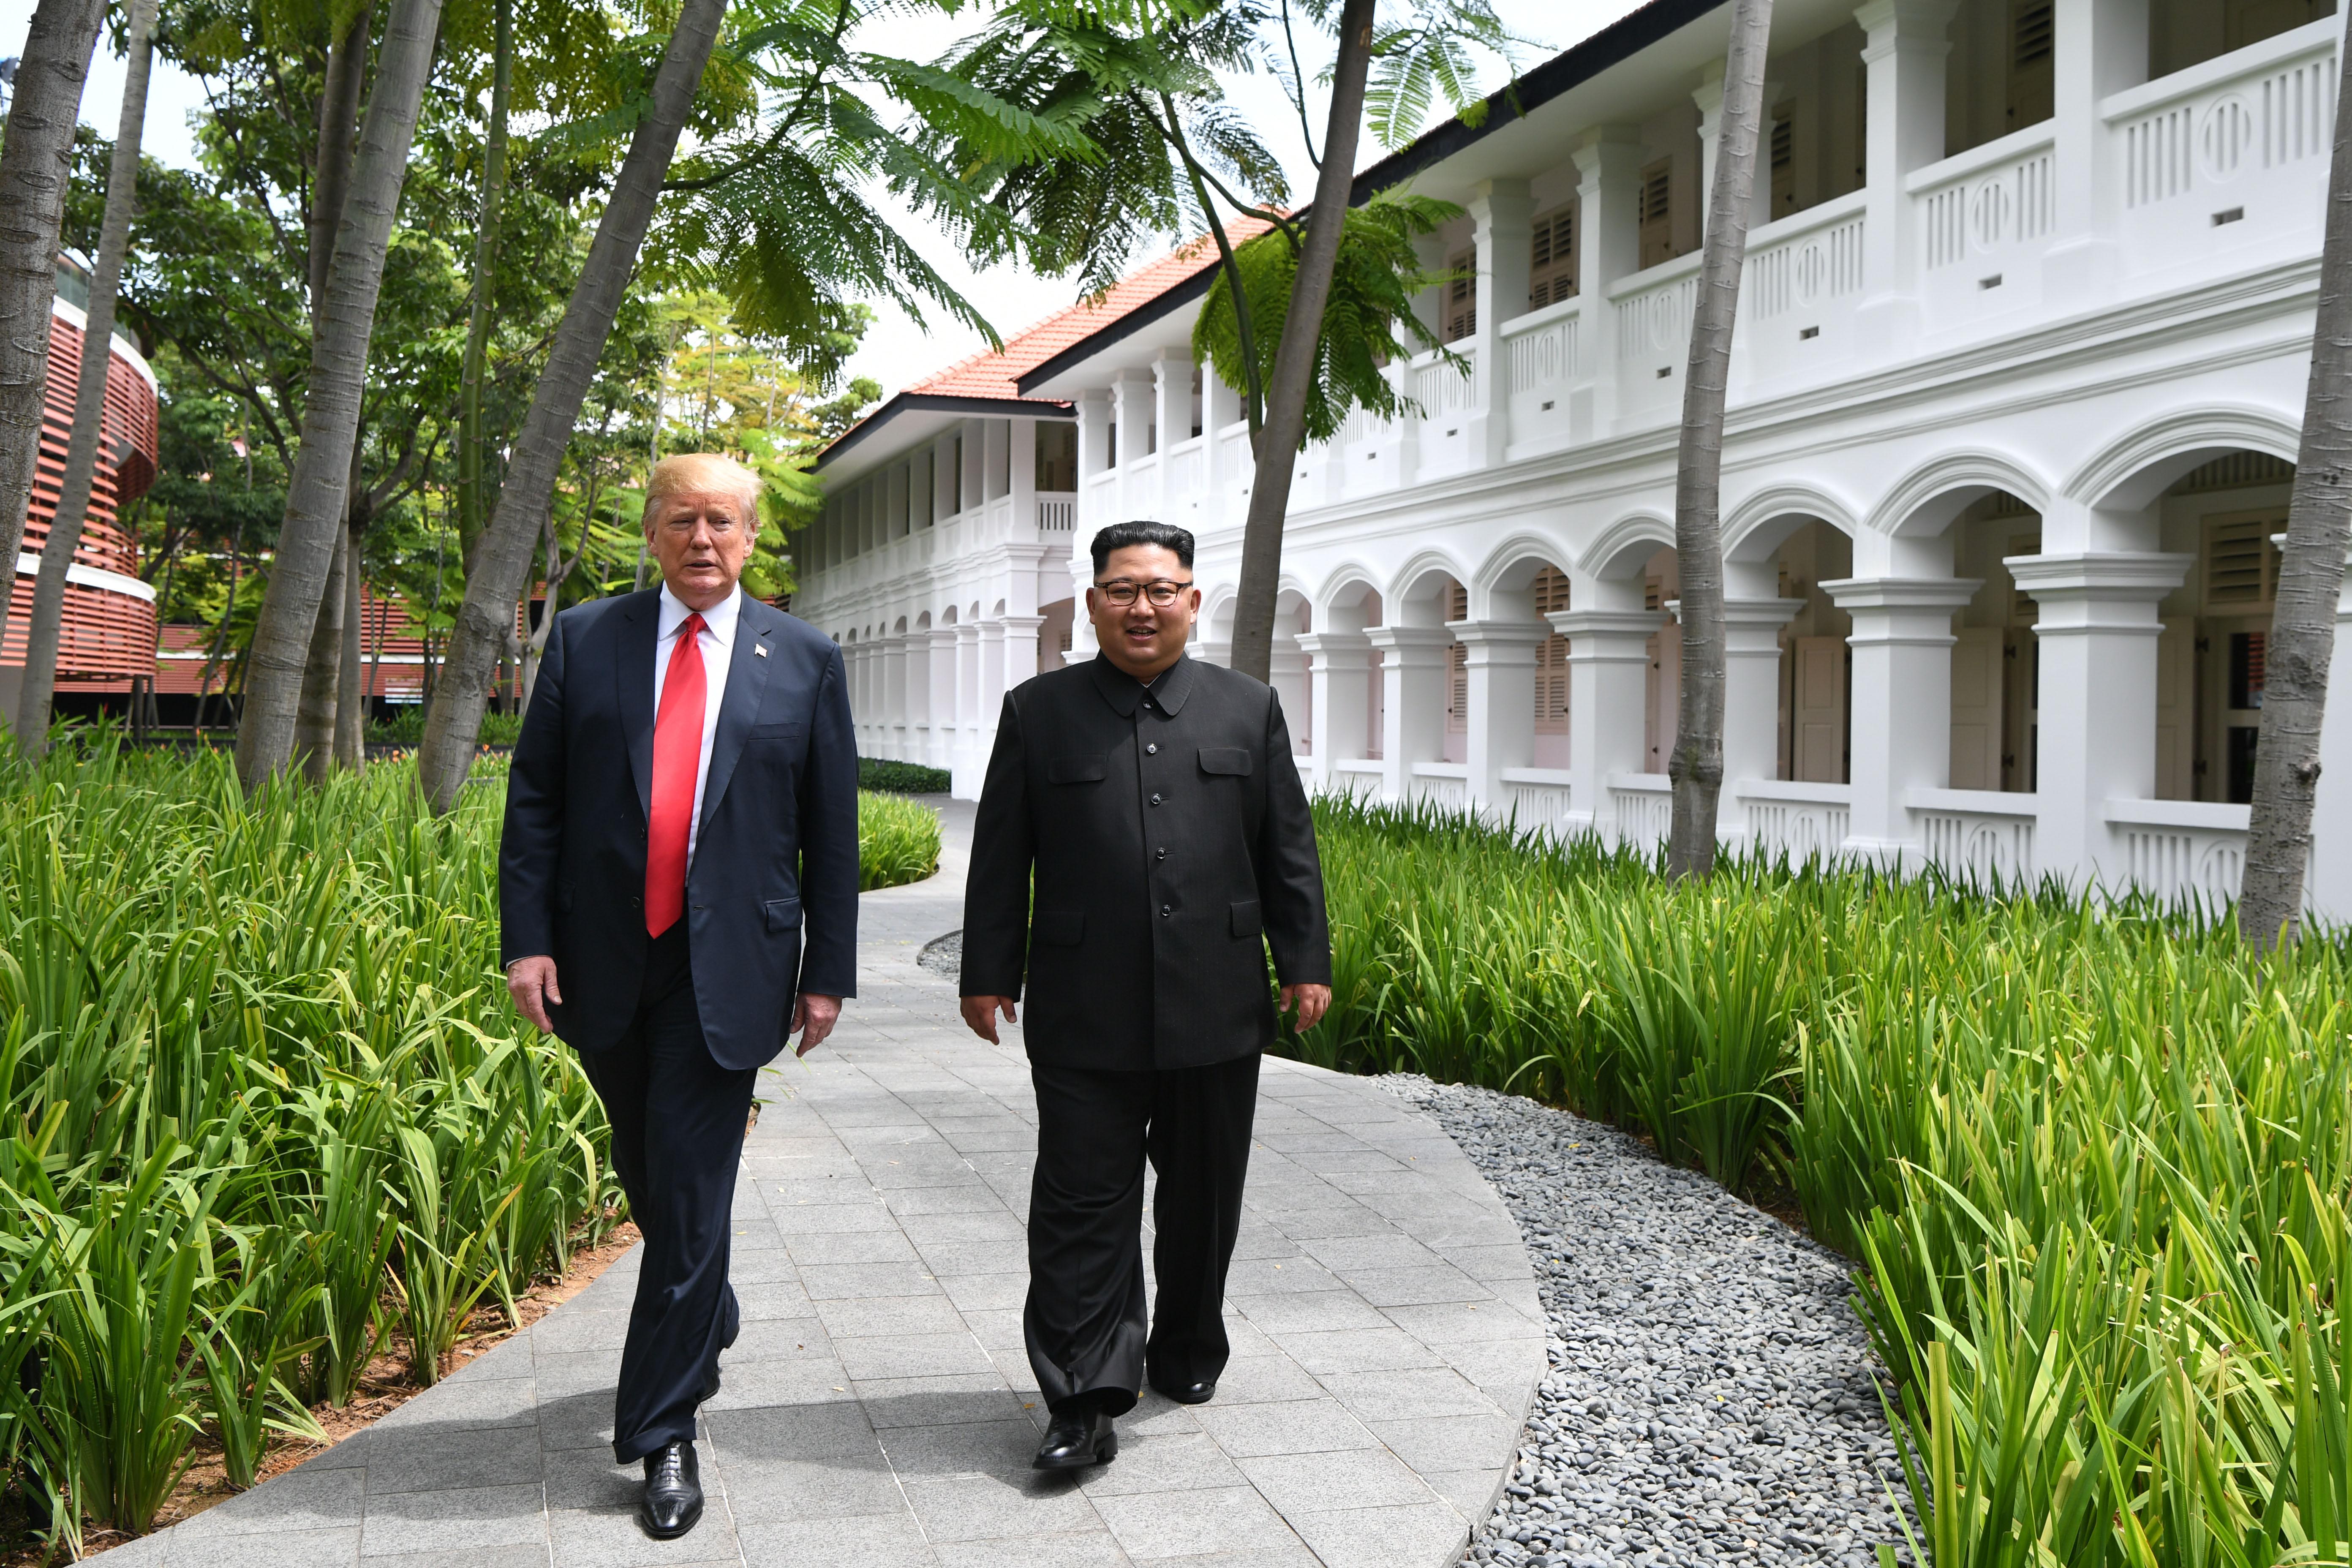 North Korea's leader Kim Jong Un (R) walks with US President Donald Trump (L) during a break in talks at their historic US-North Korea summit, at the Capella Hotel on Sentosa island in Singapore on June 12, 2018. - Donald Trump and Kim Jong Un became on June 12 the first sitting US and North Korean leaders to meet, shake hands and negotiate to end a decades-old nuclear stand-off. (Photo by Anthony WALLACE / POOL / AFP)        (Photo credit should read ANTHONY WALLACE/AFP/Getty Images)